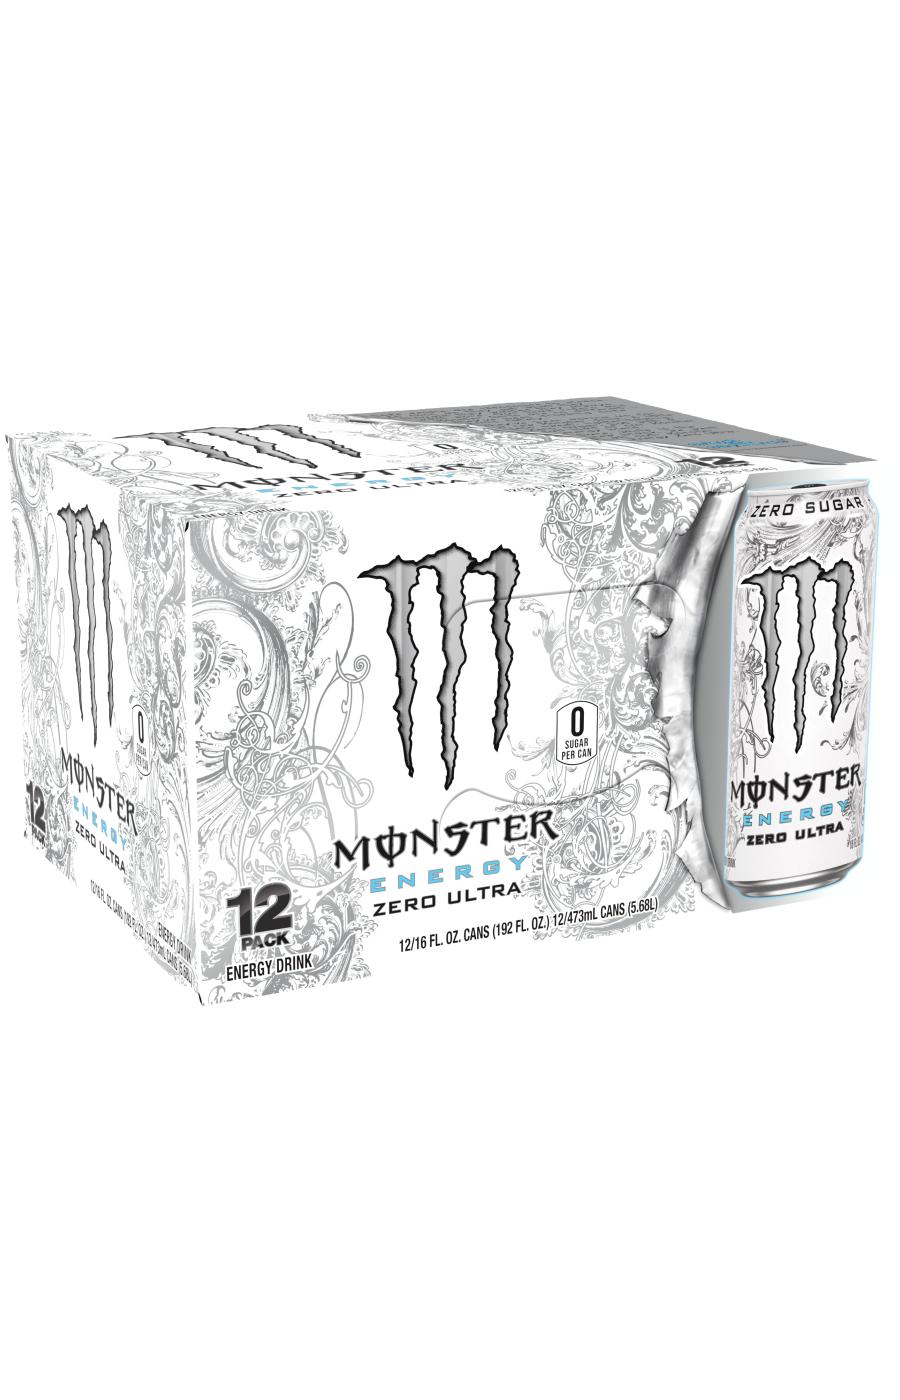 Monster Energy Zero Ultra, Sugar Free Energy Drink, 16 oz. Cans; image 2 of 3